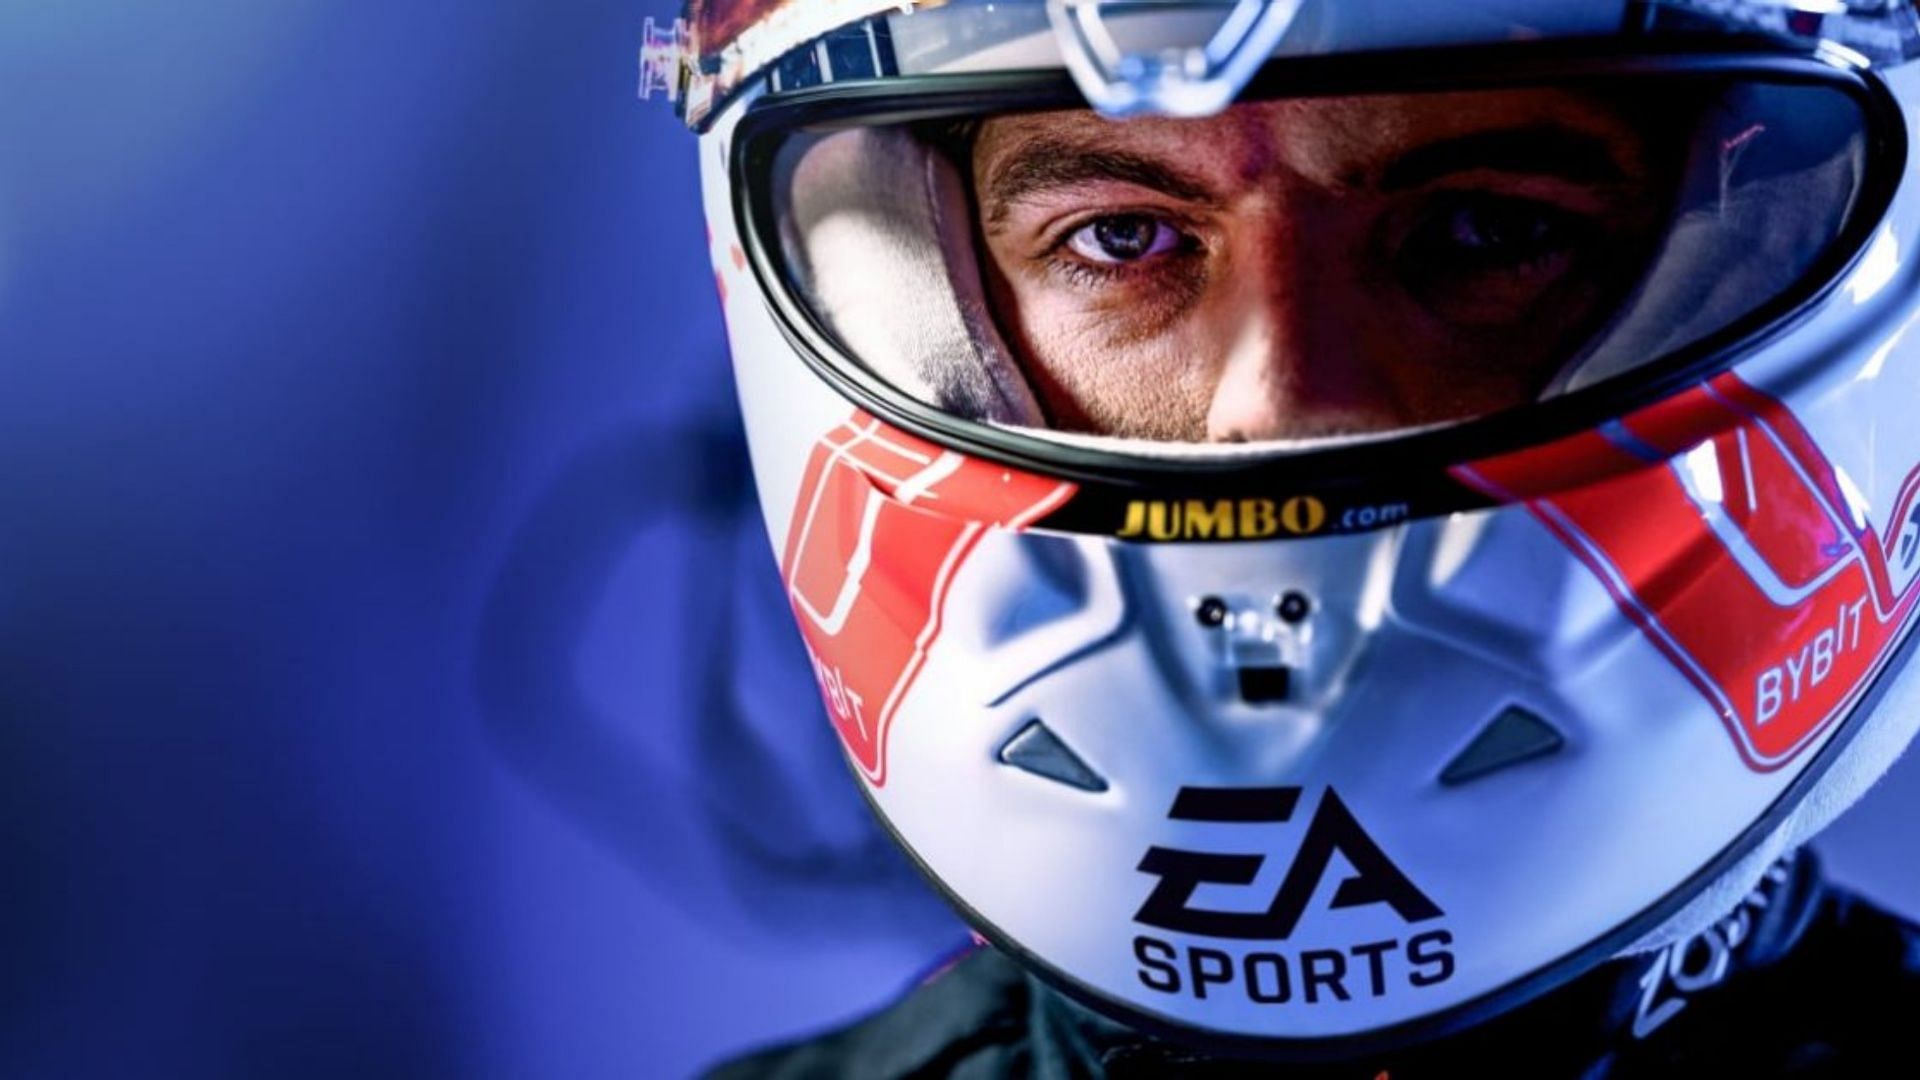 Race against Verstappen and Leclerc in new F1 23 game feature - GPblog